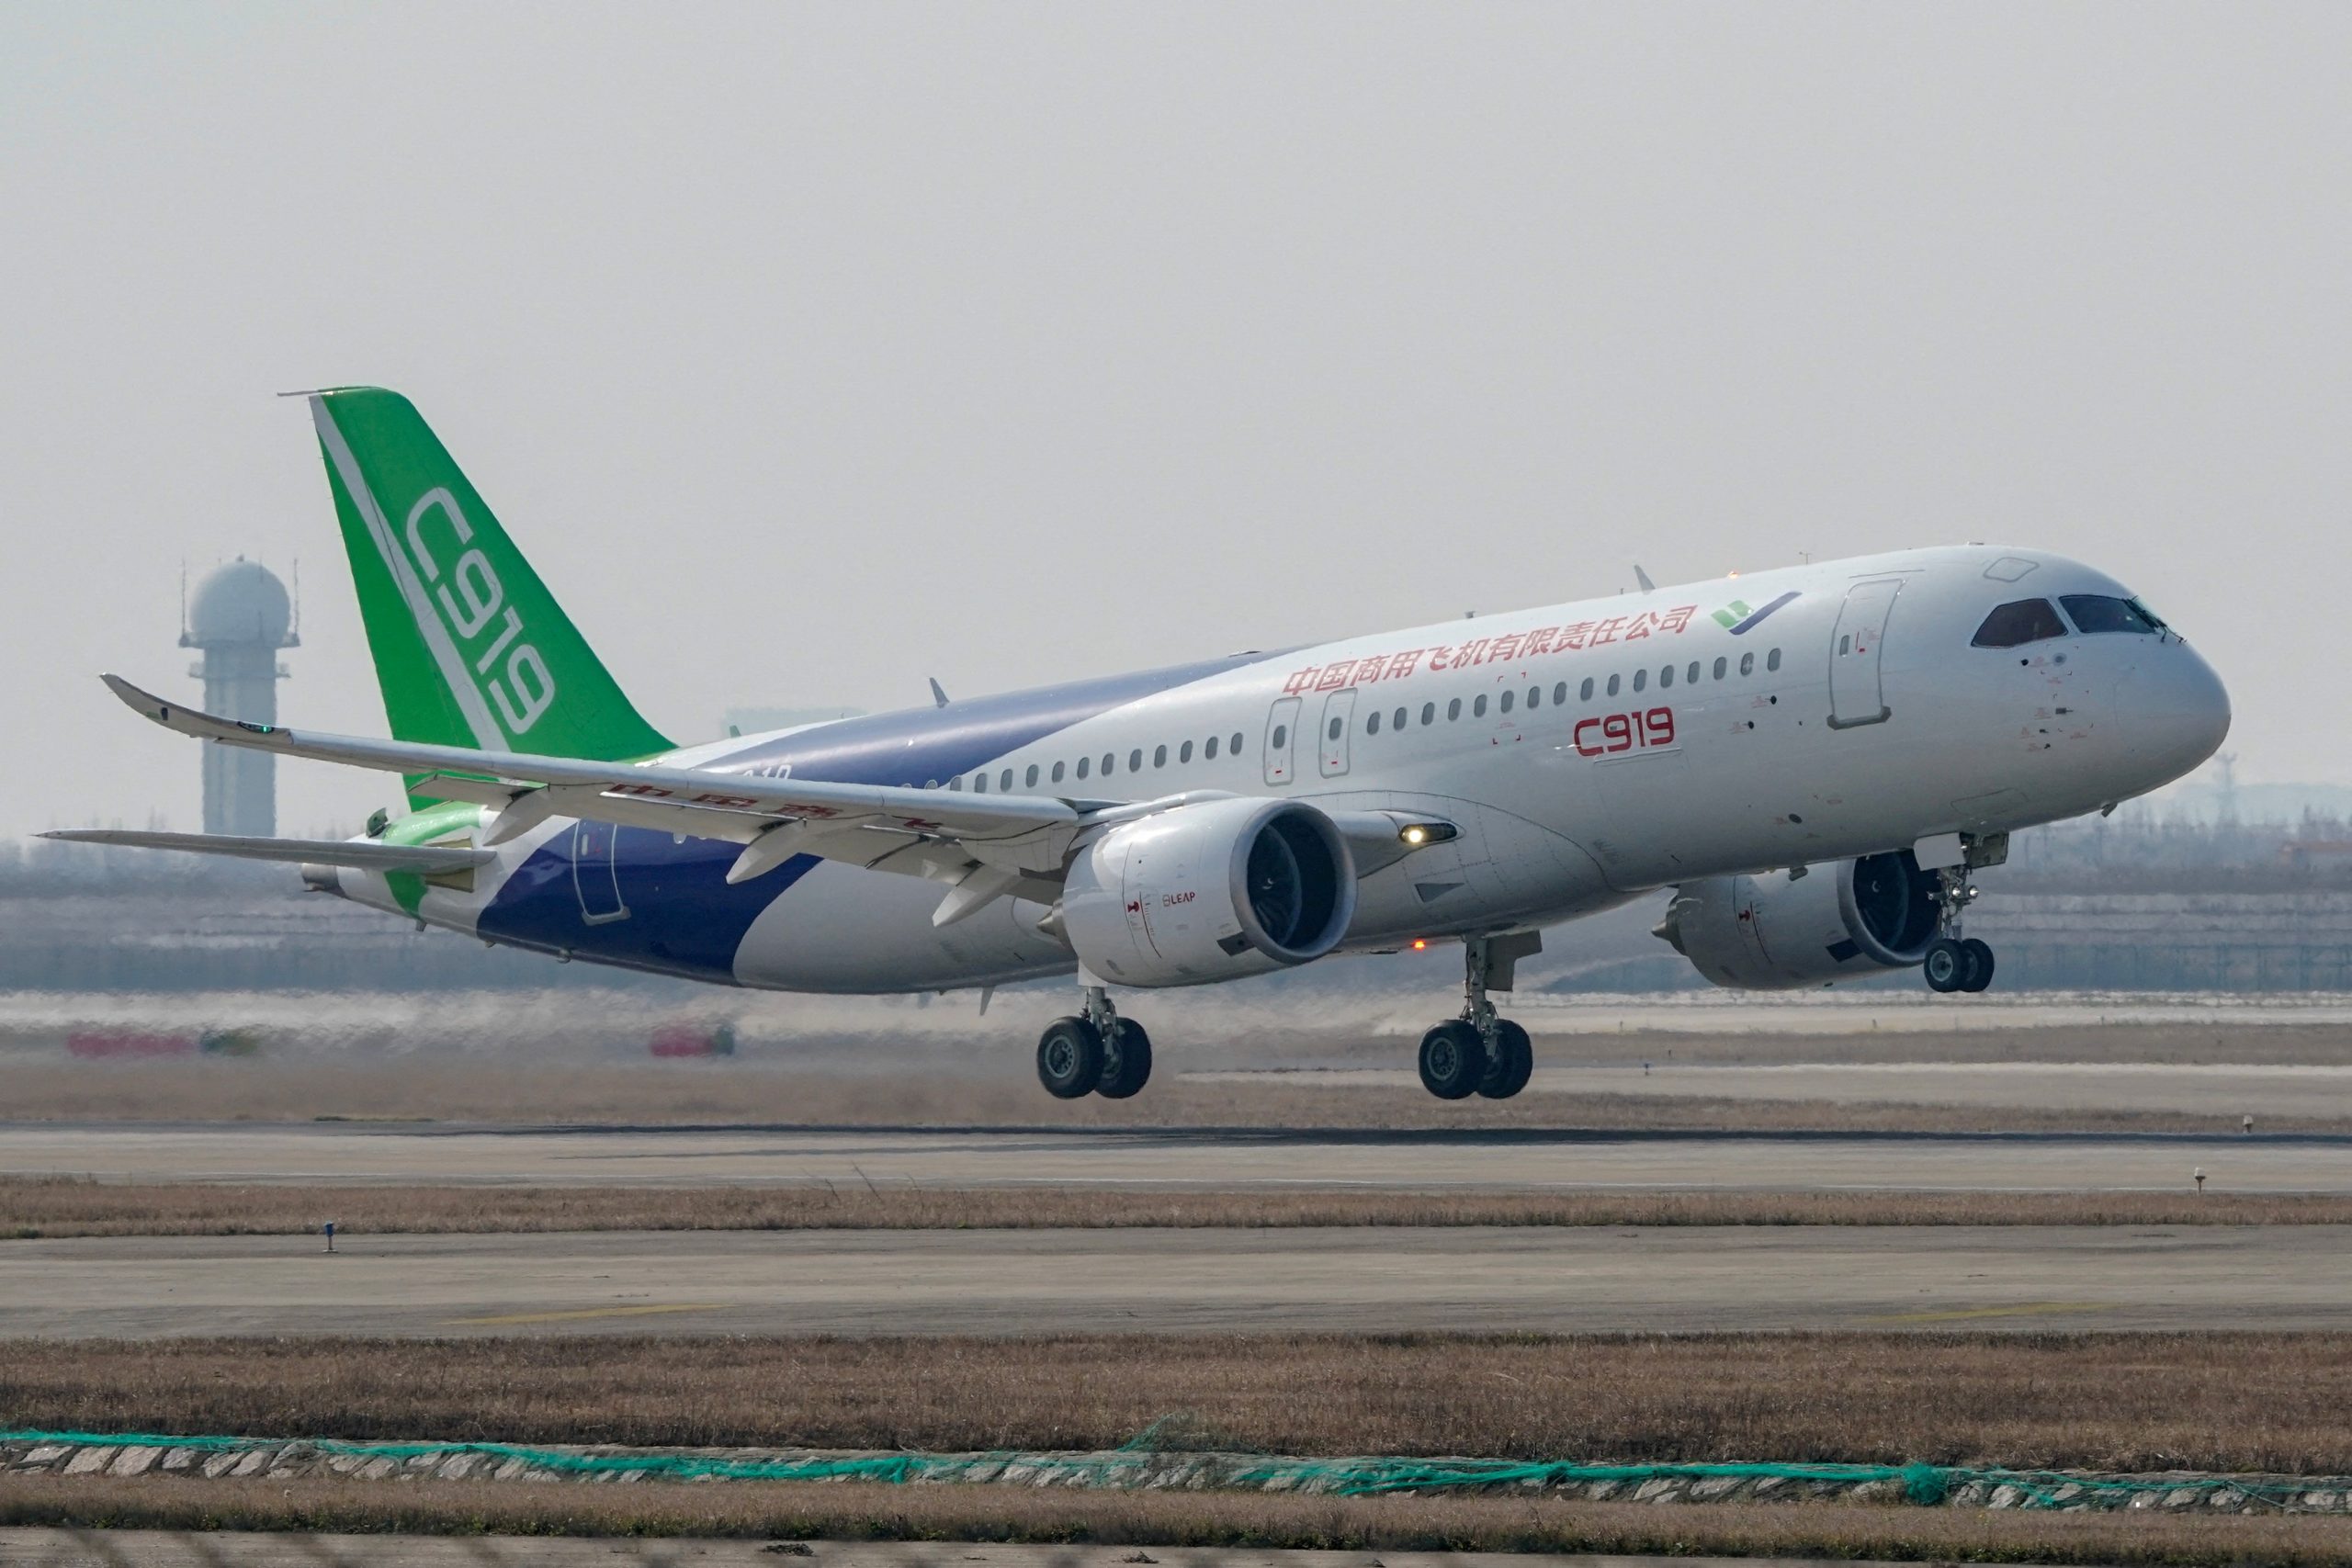 The C919 is rival to the Boeing 737 and the Airbus A320.